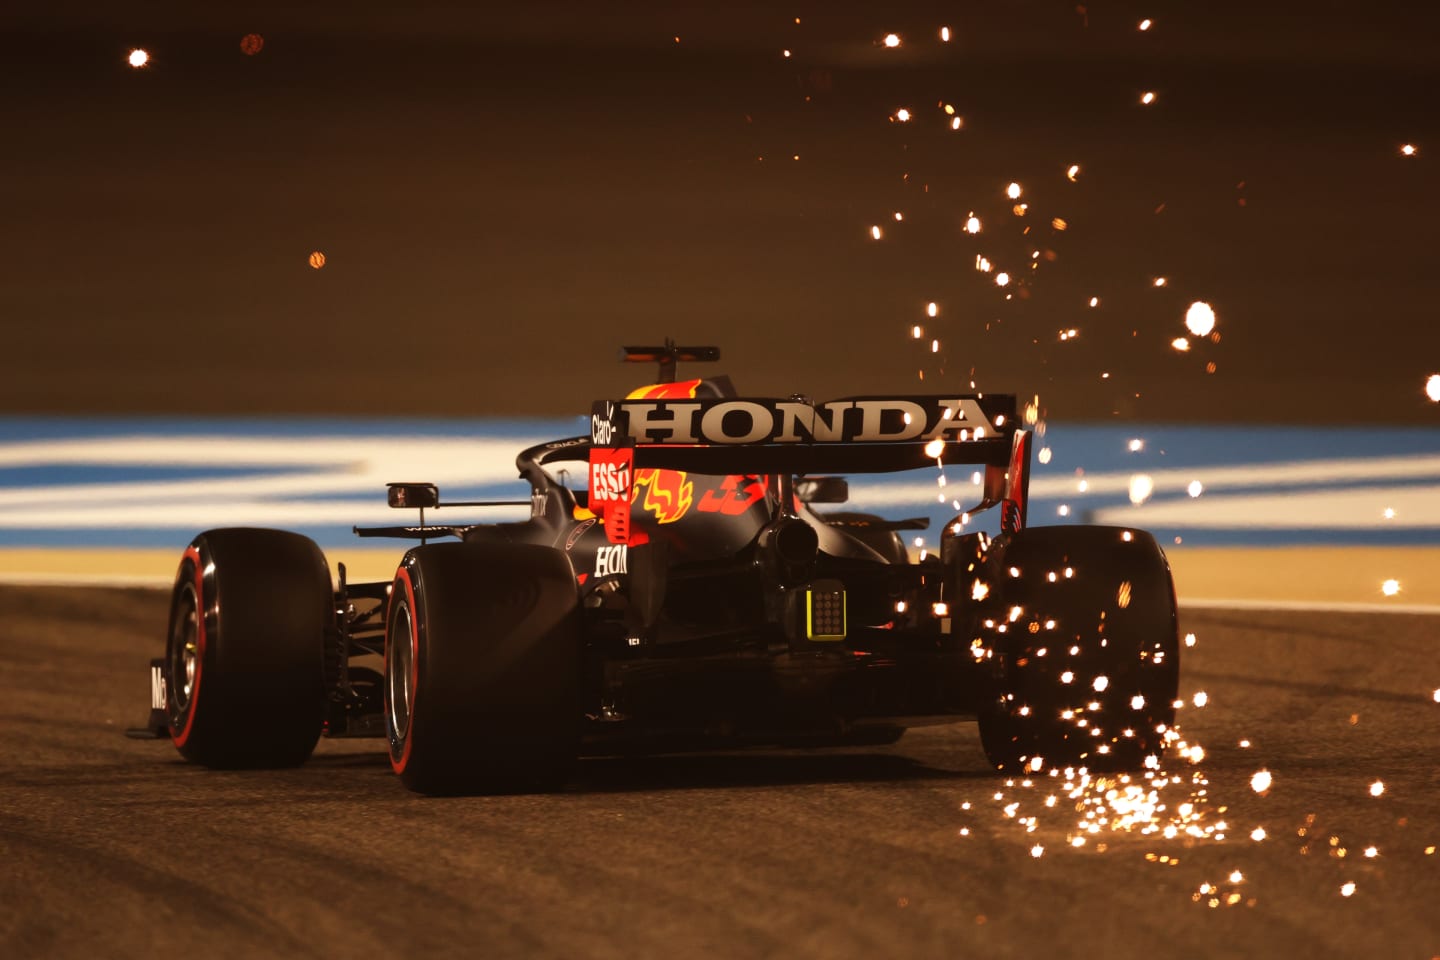 BAHRAIN, BAHRAIN - MARCH 26: Sparks fly behind Max Verstappen of the Netherlands driving the (33) Red Bull Racing RB16B Honda on track during practice ahead of the F1 Grand Prix of Bahrain at Bahrain International Circuit on March 26, 2021 in Bahrain, Bahrain. (Photo by Lars Baron/Getty Images)